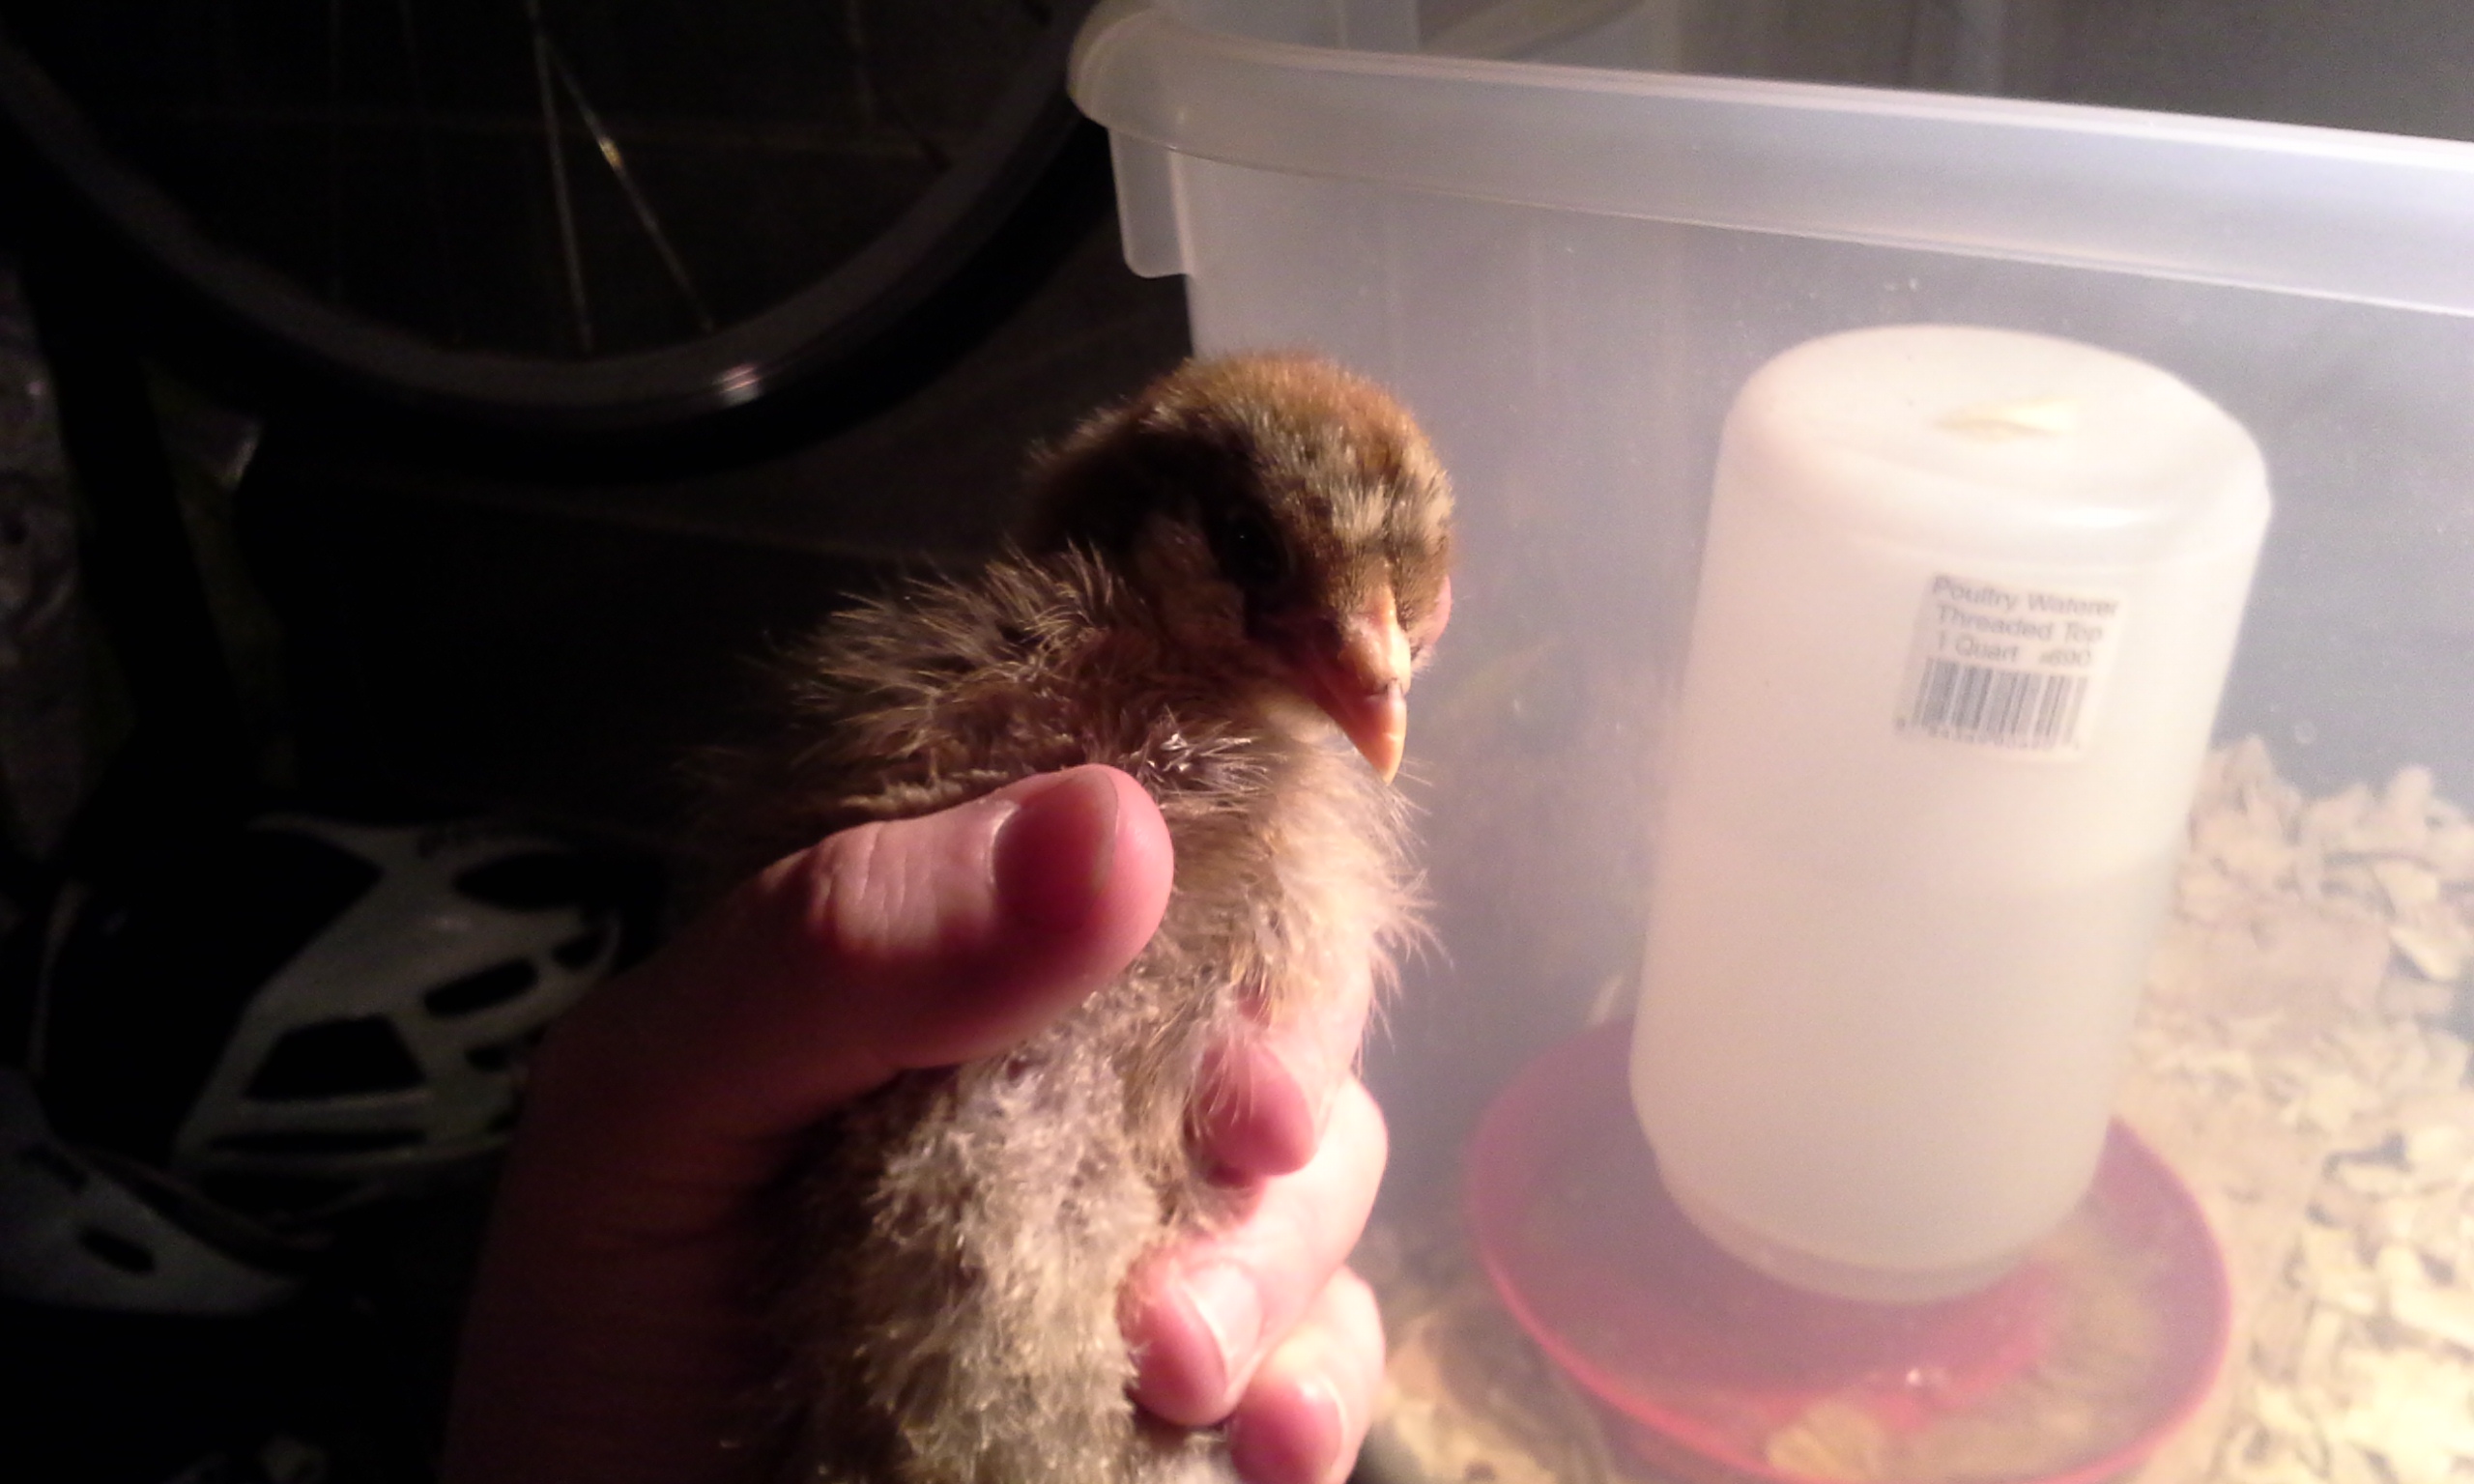 4/29/2014, Still a little hand-shy but getting better the more we interact with them. This is right before we cleaned the brooder for the day. Don't worry, they get their water dish cleaned several times a day.